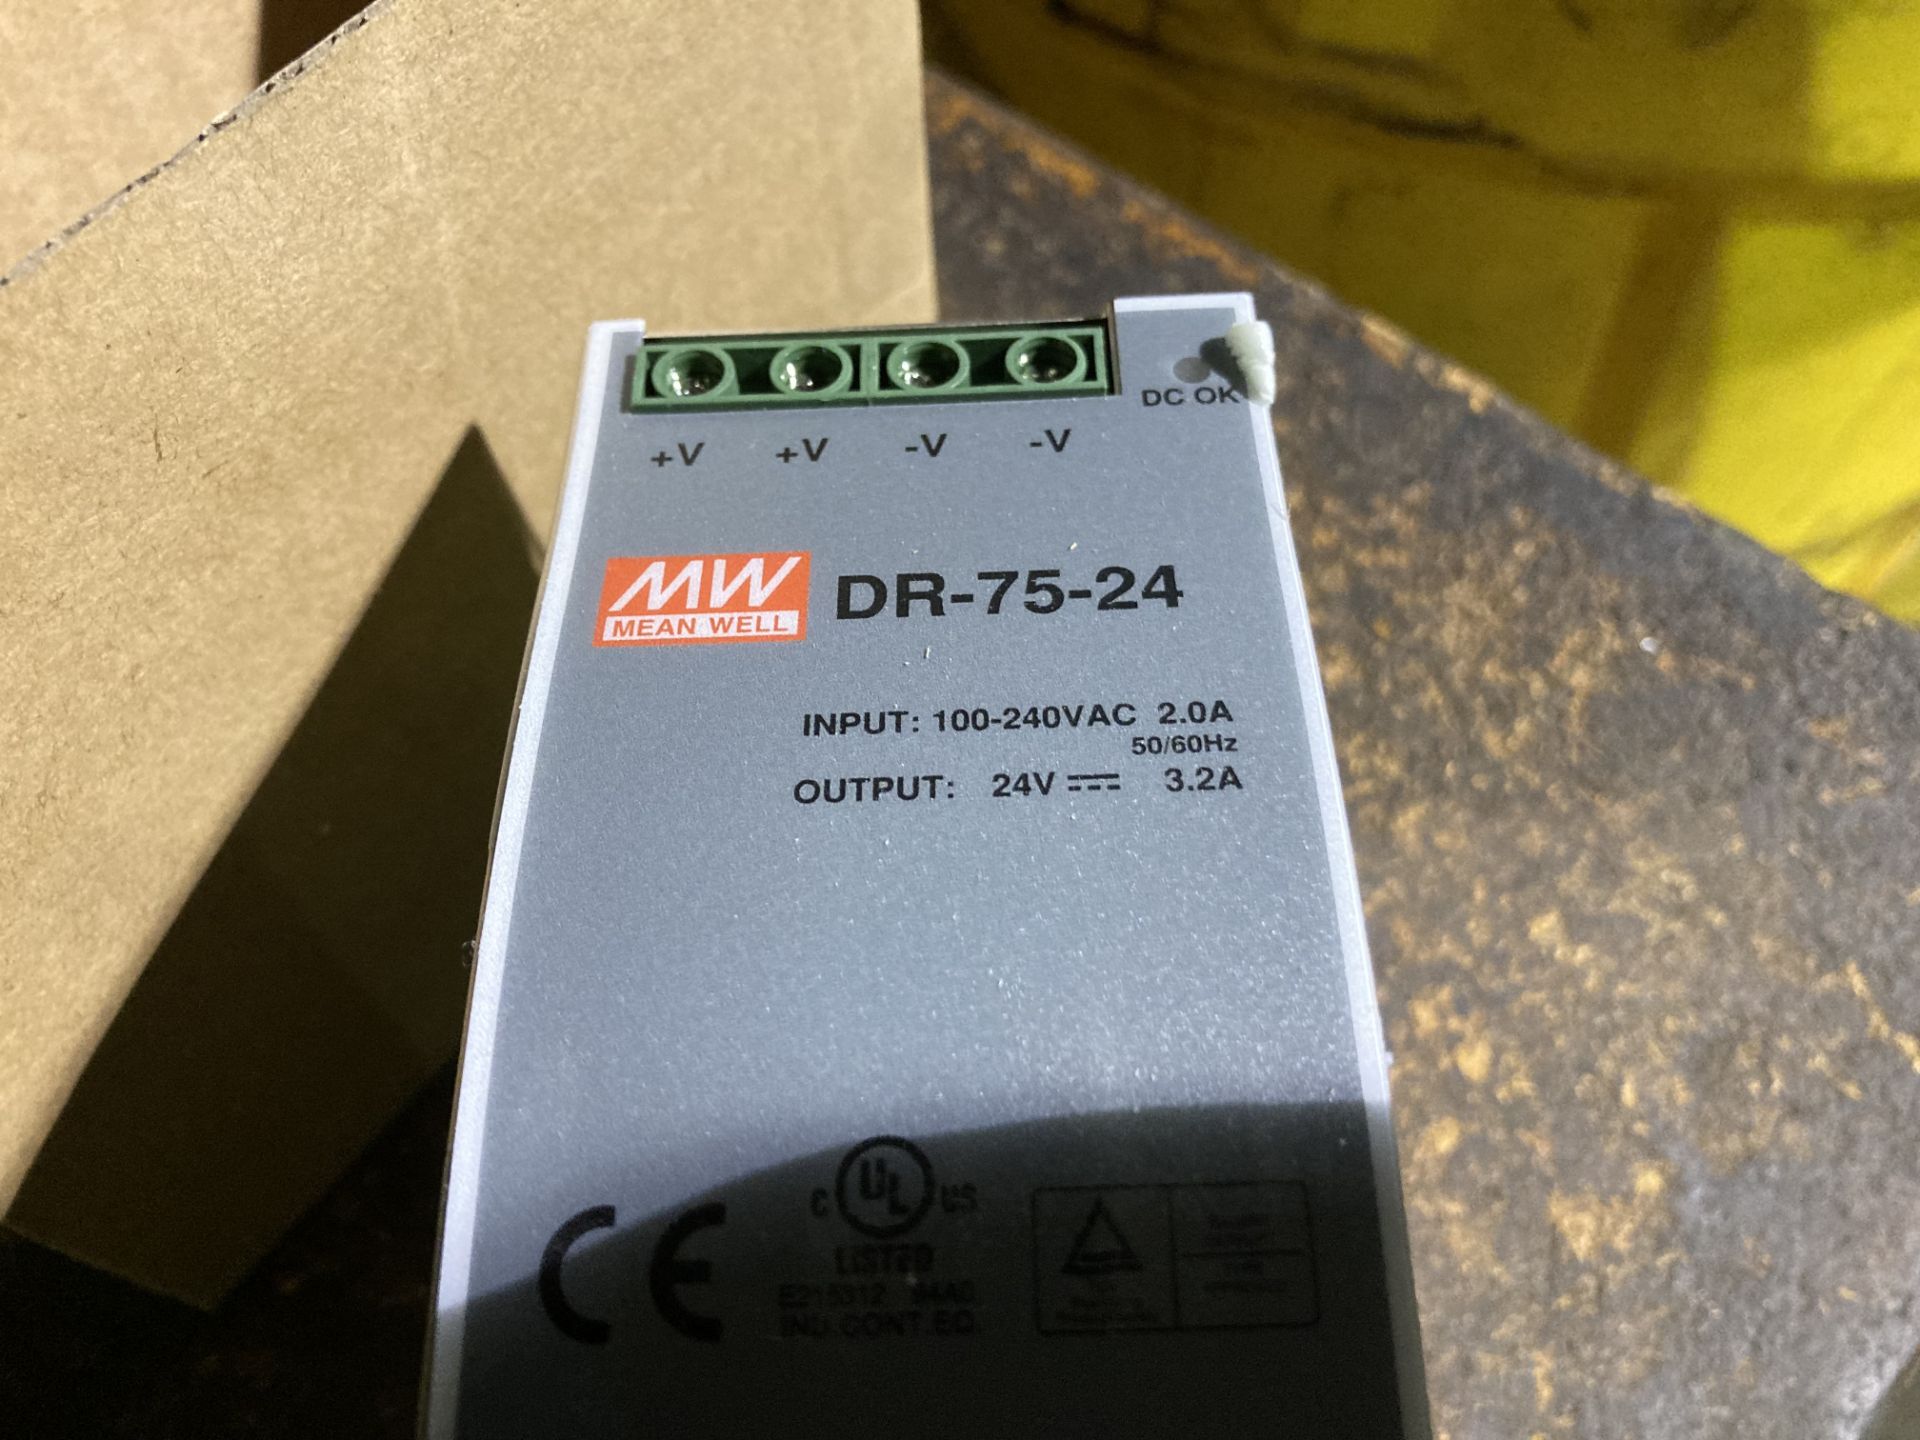 New Mean Well DR-75-24 Power Supply - Image 4 of 4